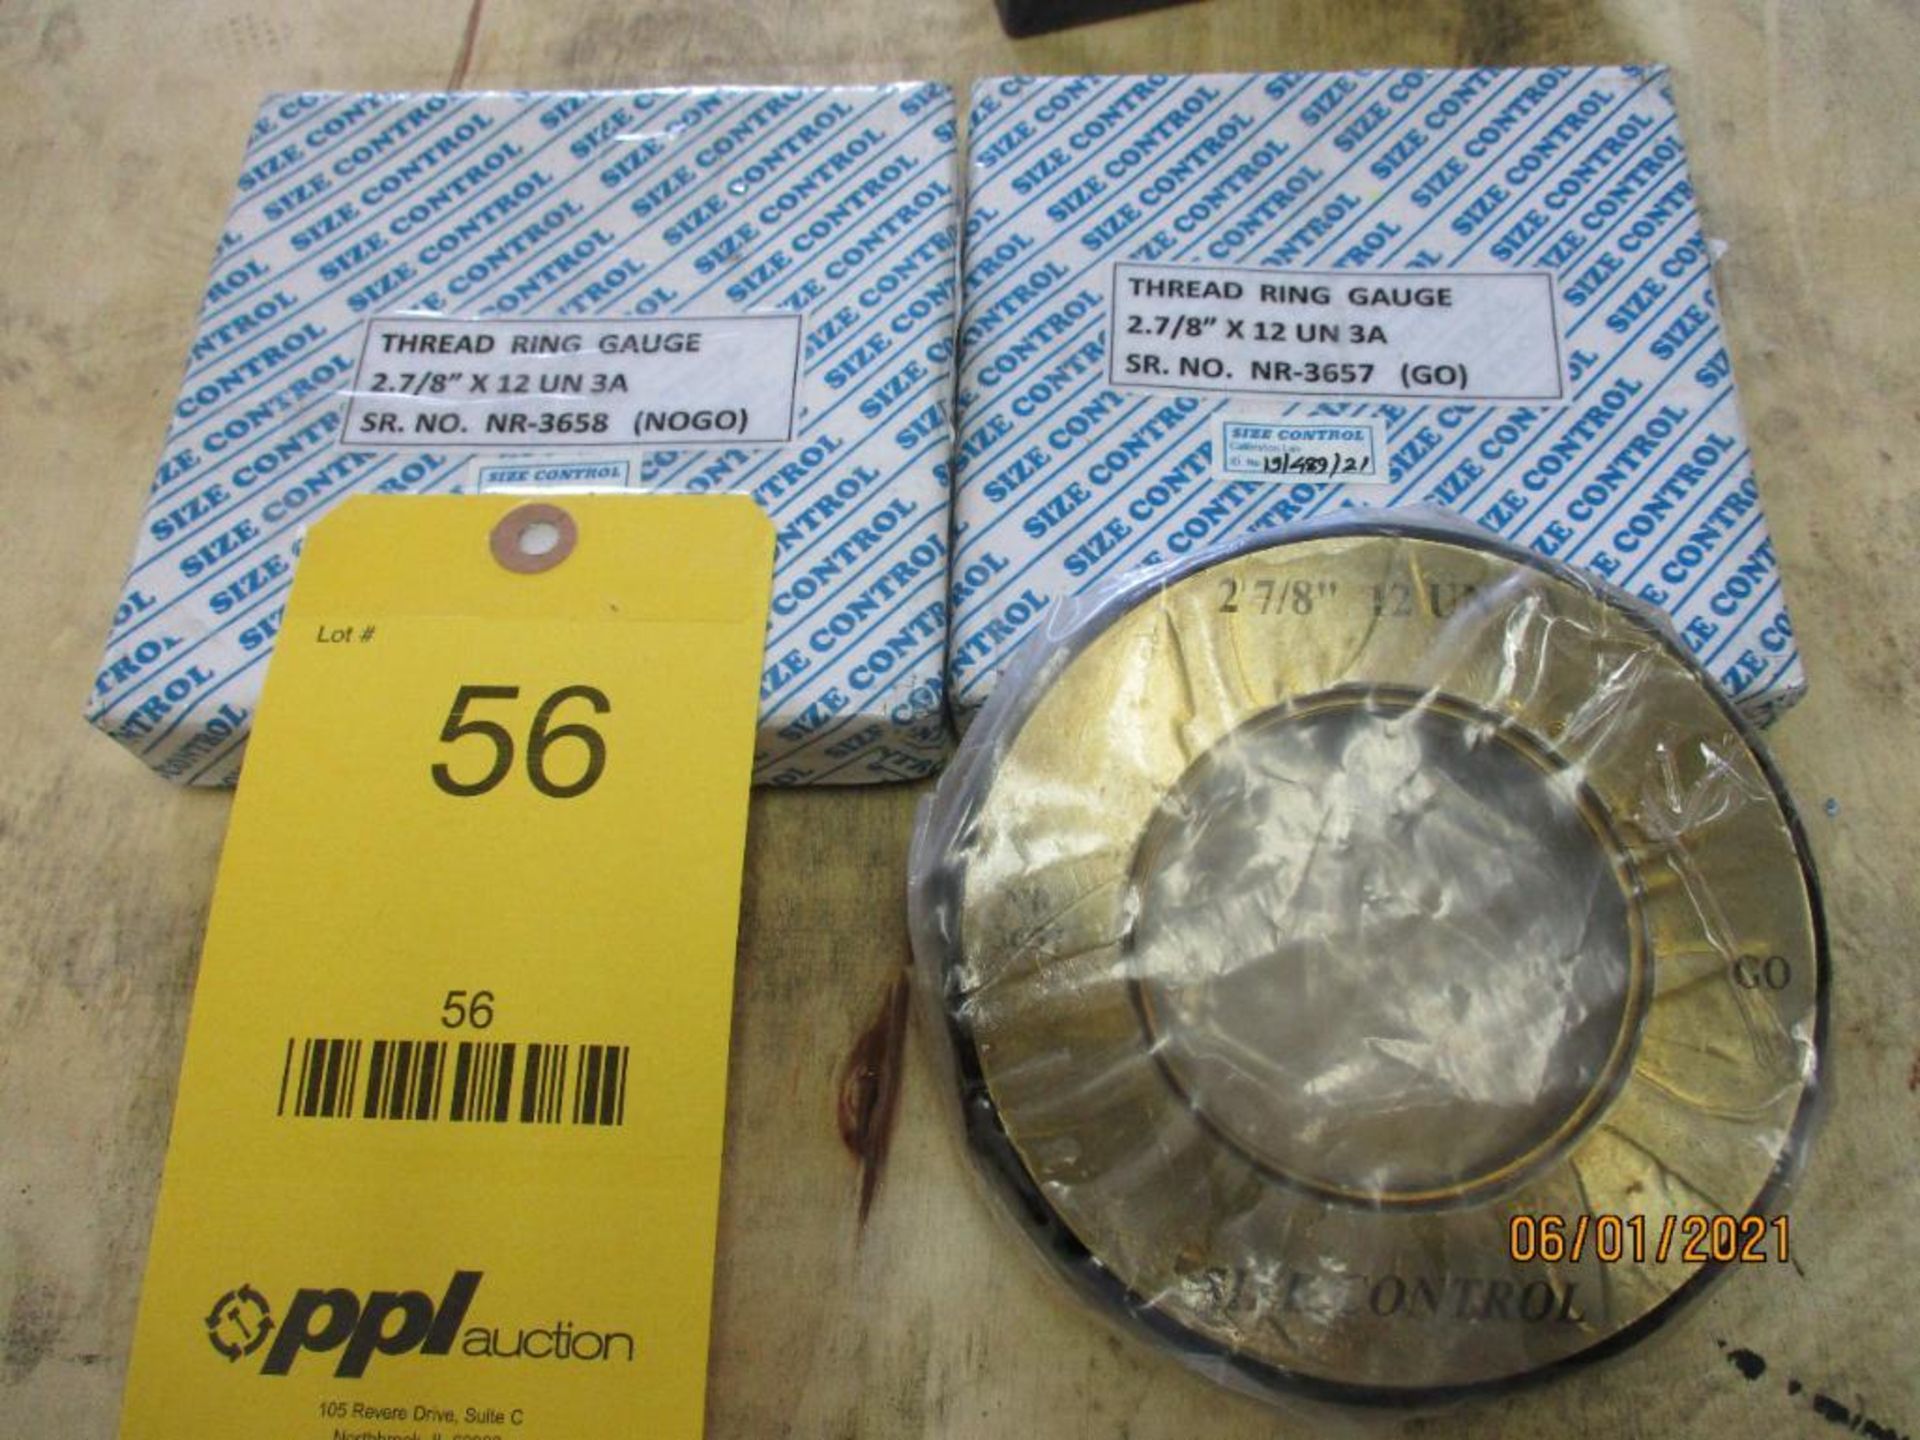 Set of GO/NOGO Thread Ring Gages, 2-7//8 in. - 12 UN-3A (All inspection eq. is like New and Mostly